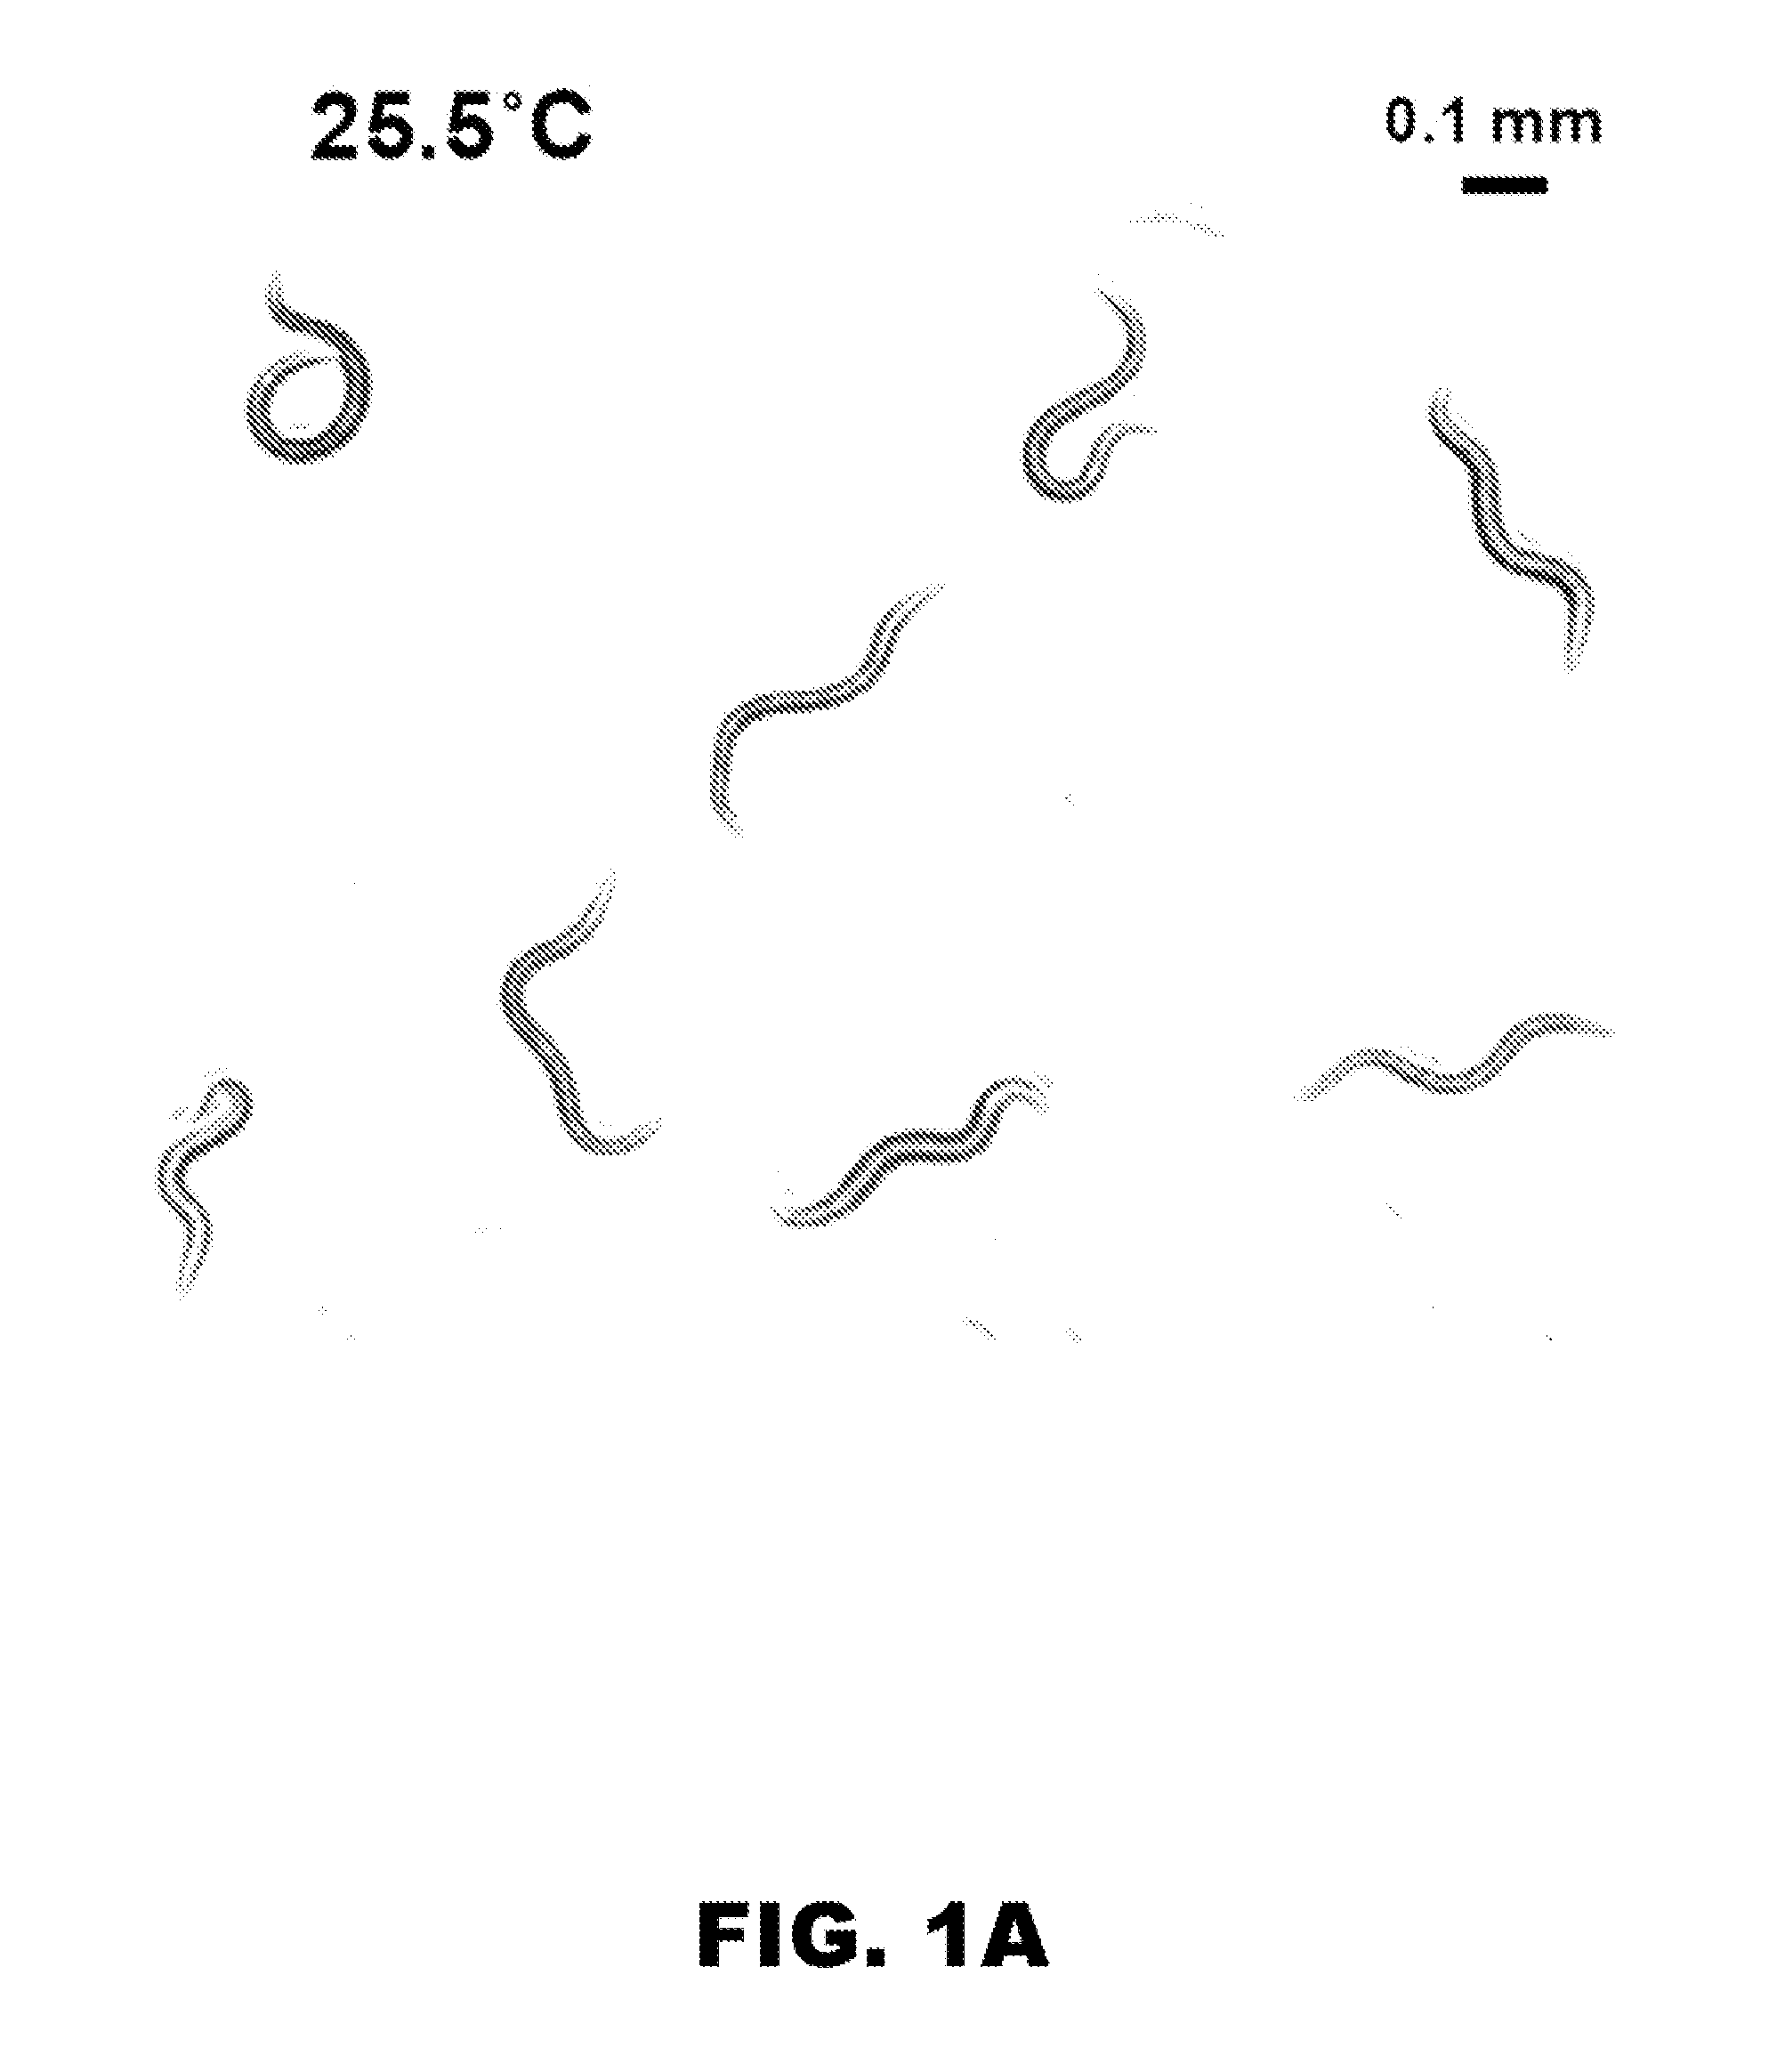 Methods for identifying modulators of lifespan and resistance to oxidative stress